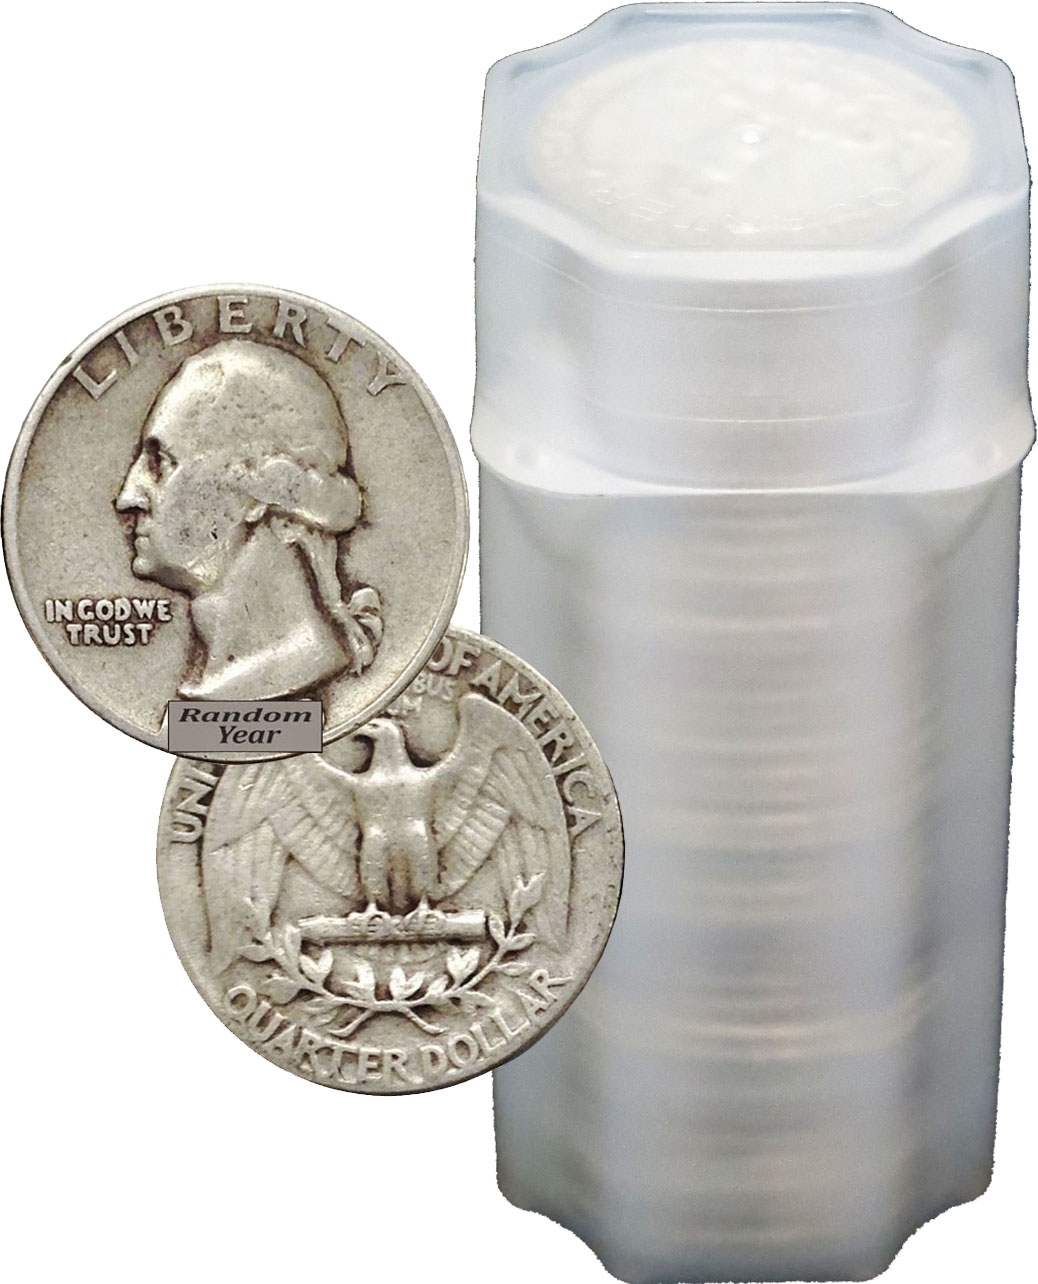 Details About Full Dates Roll Of 40 $10 Face Value 90% Silver Washington  Quarters